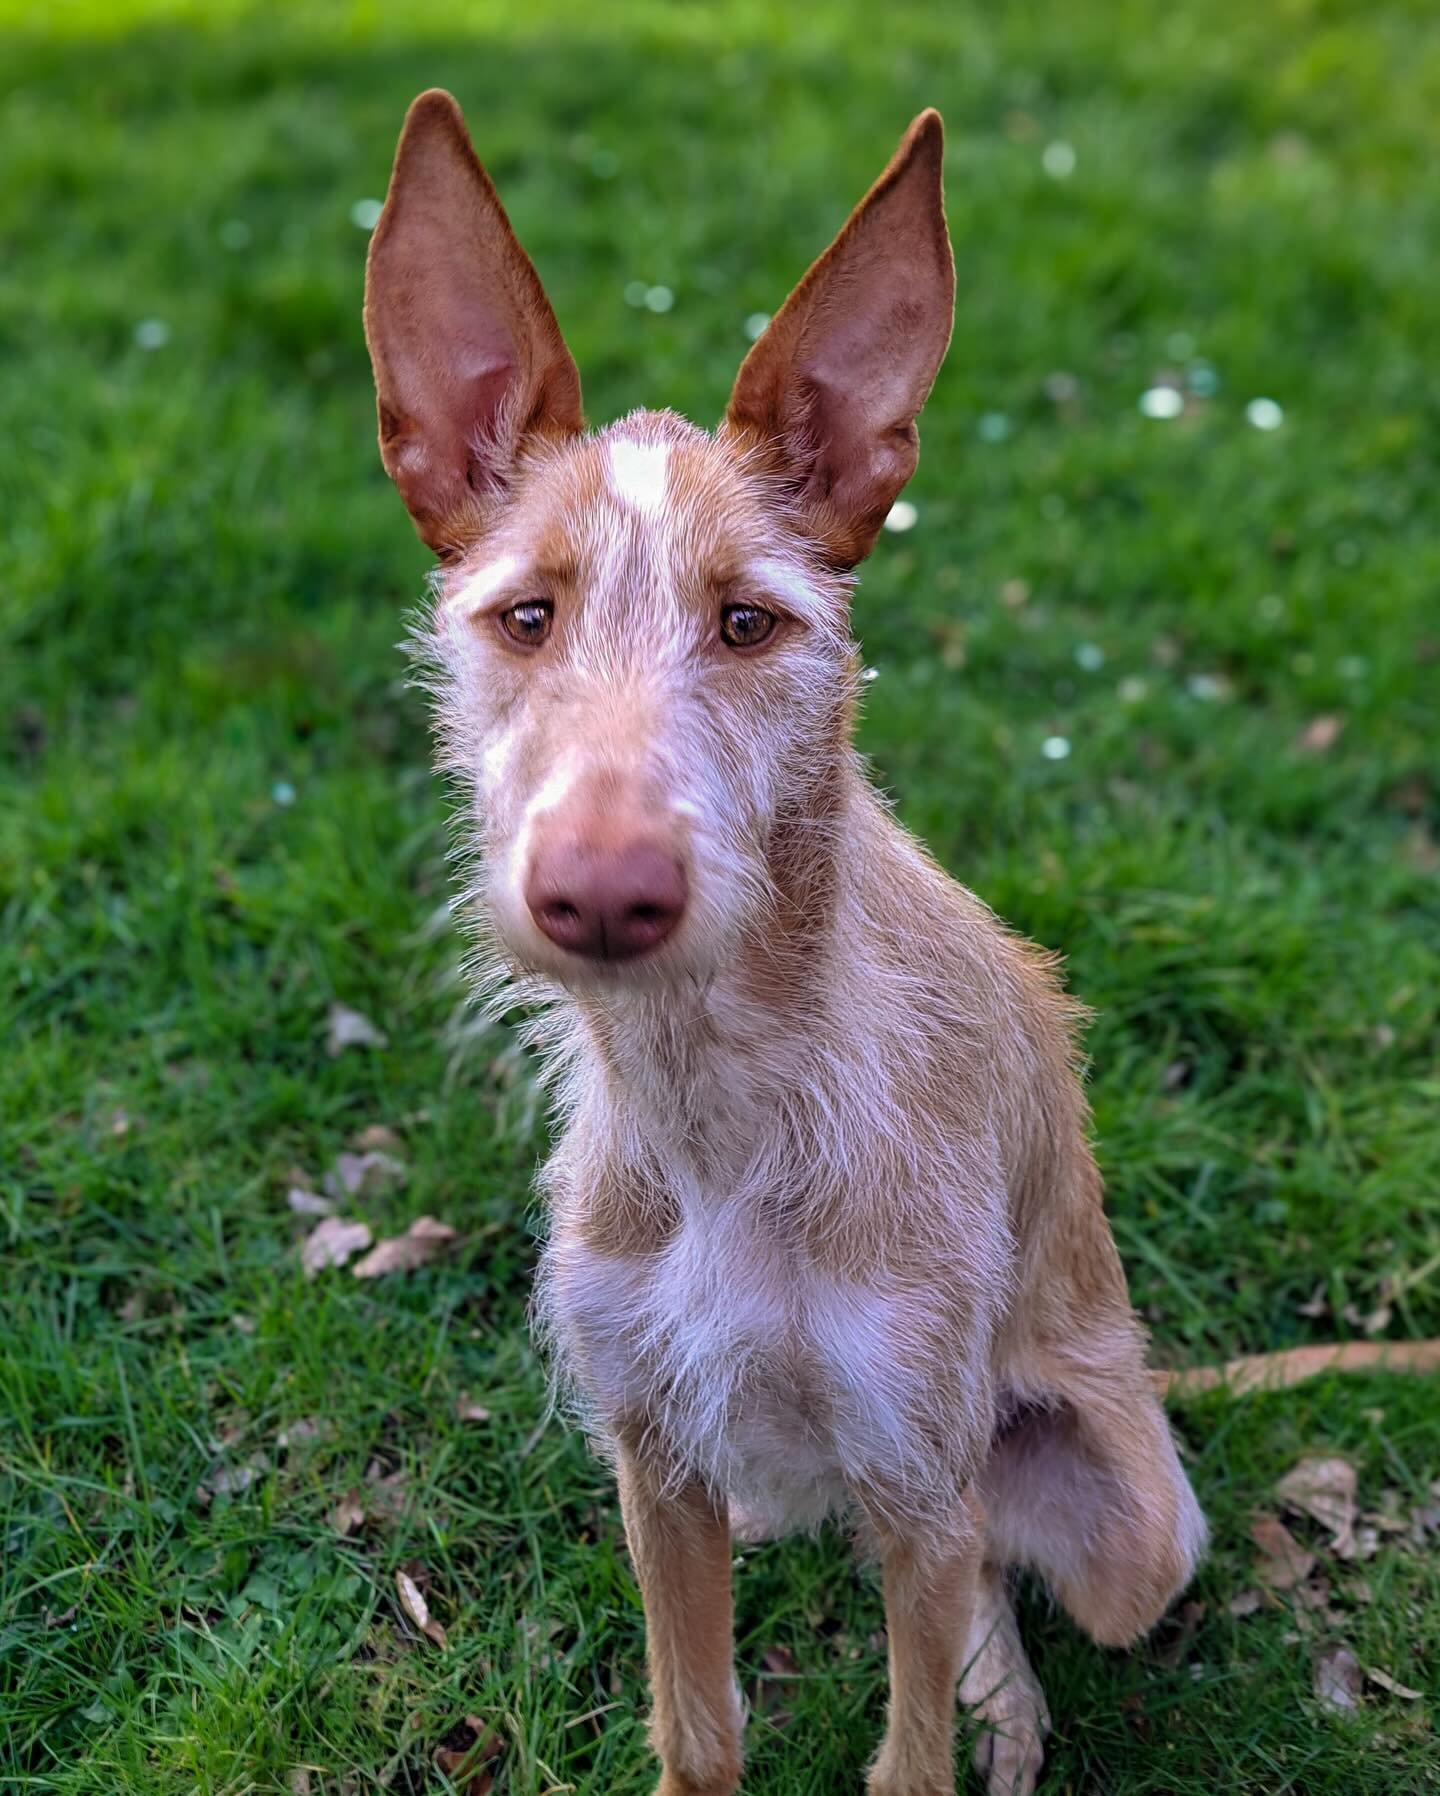 Striking fuzzy Pod REINA is looking for a home in the Netherlands 🇳🇱 

Due to personal circumstances, her family have made the difficult decision to rehome her. She is currently an only dog in the home but really thrives on the days she goes to dog